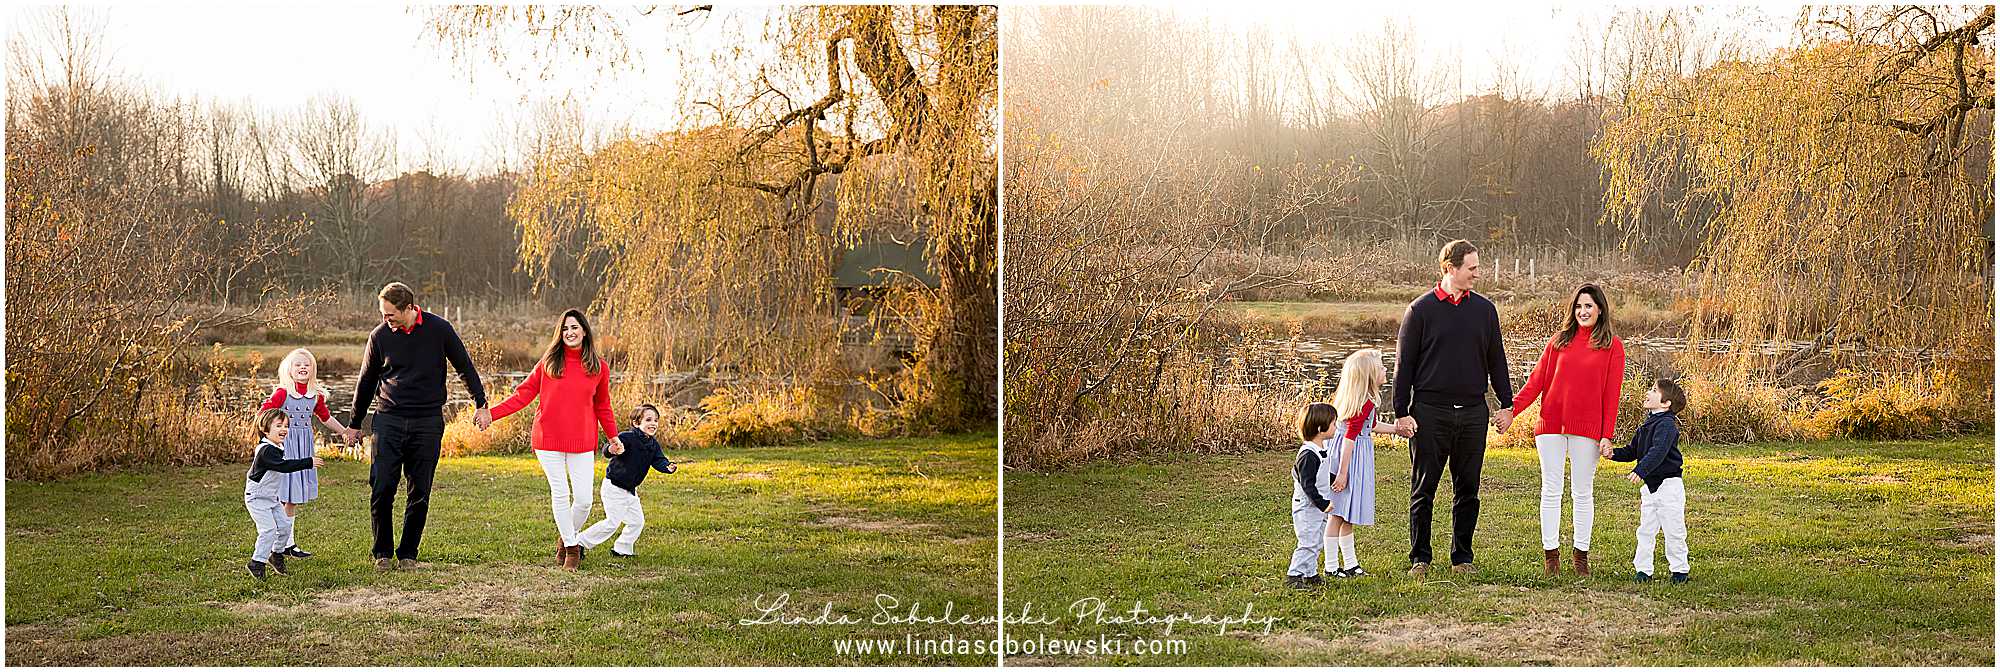 family of five having fun together for a family photo session, Old Saybrook, CT Photographer